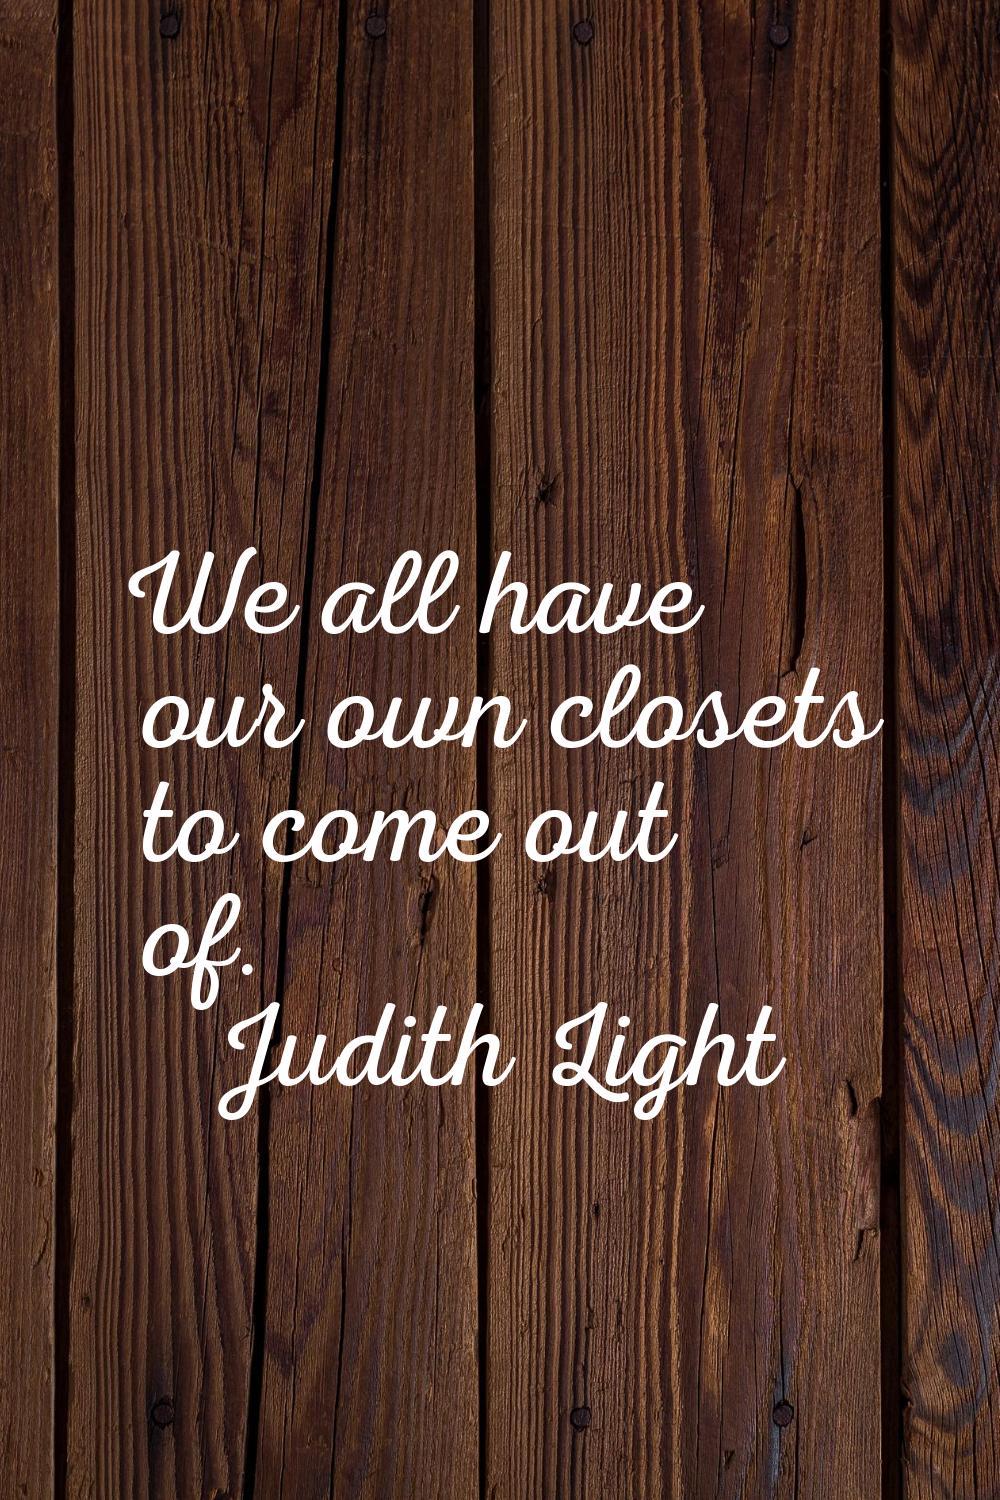 We all have our own closets to come out of.